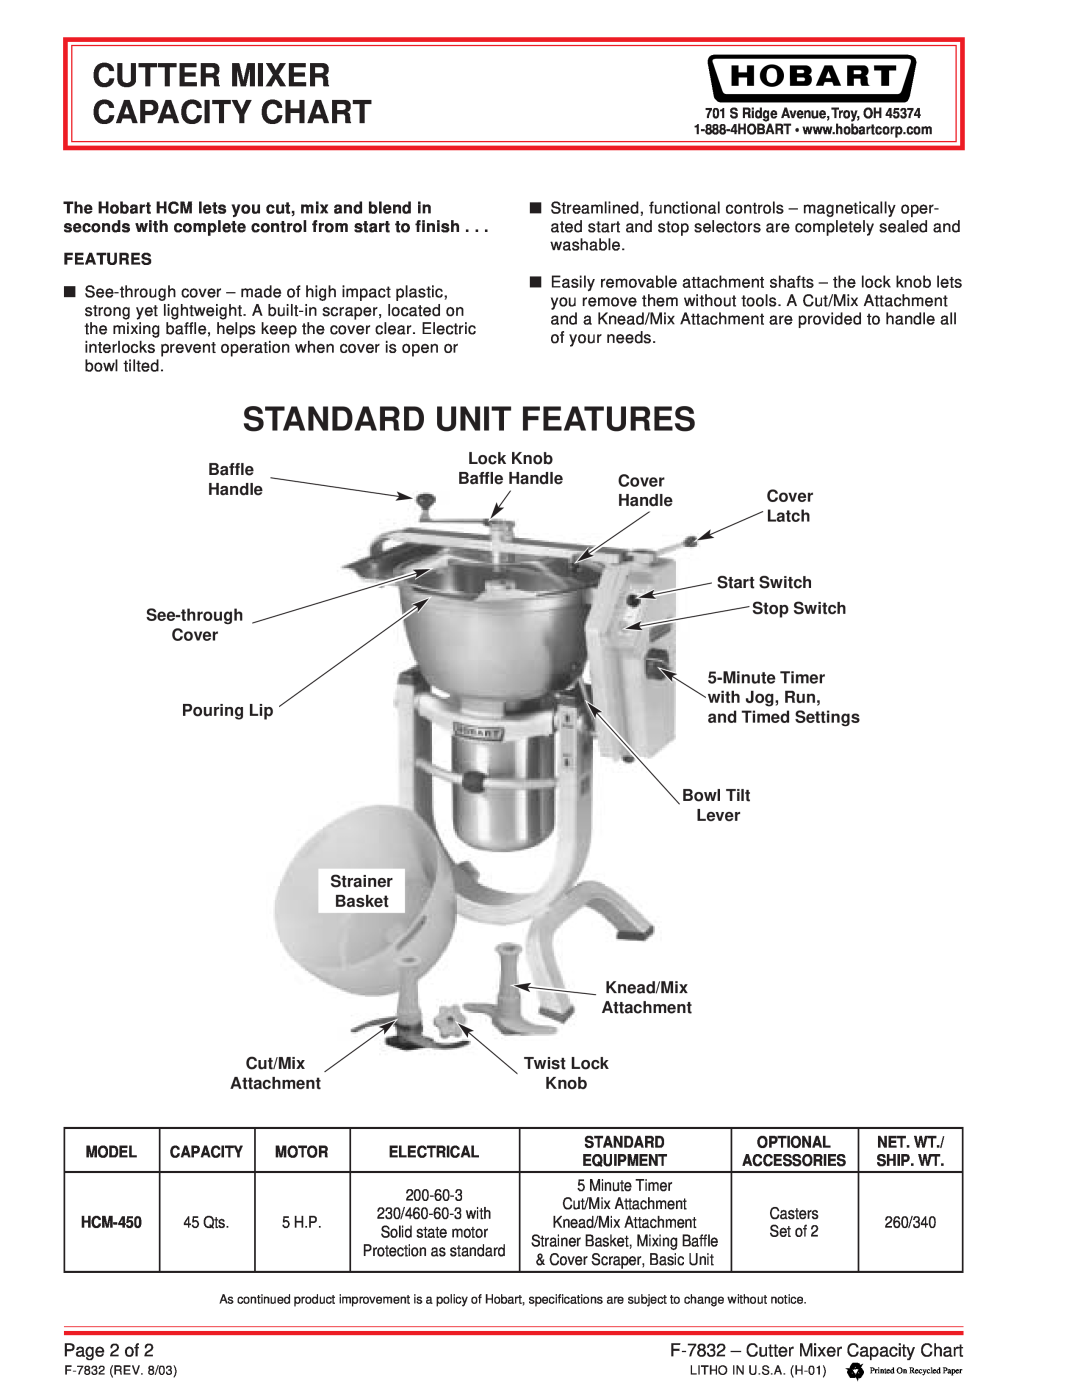 Hobart manual Page 2 of, Standard Unit Features, F-7832 - Cutter Mixer Capacity Chart 